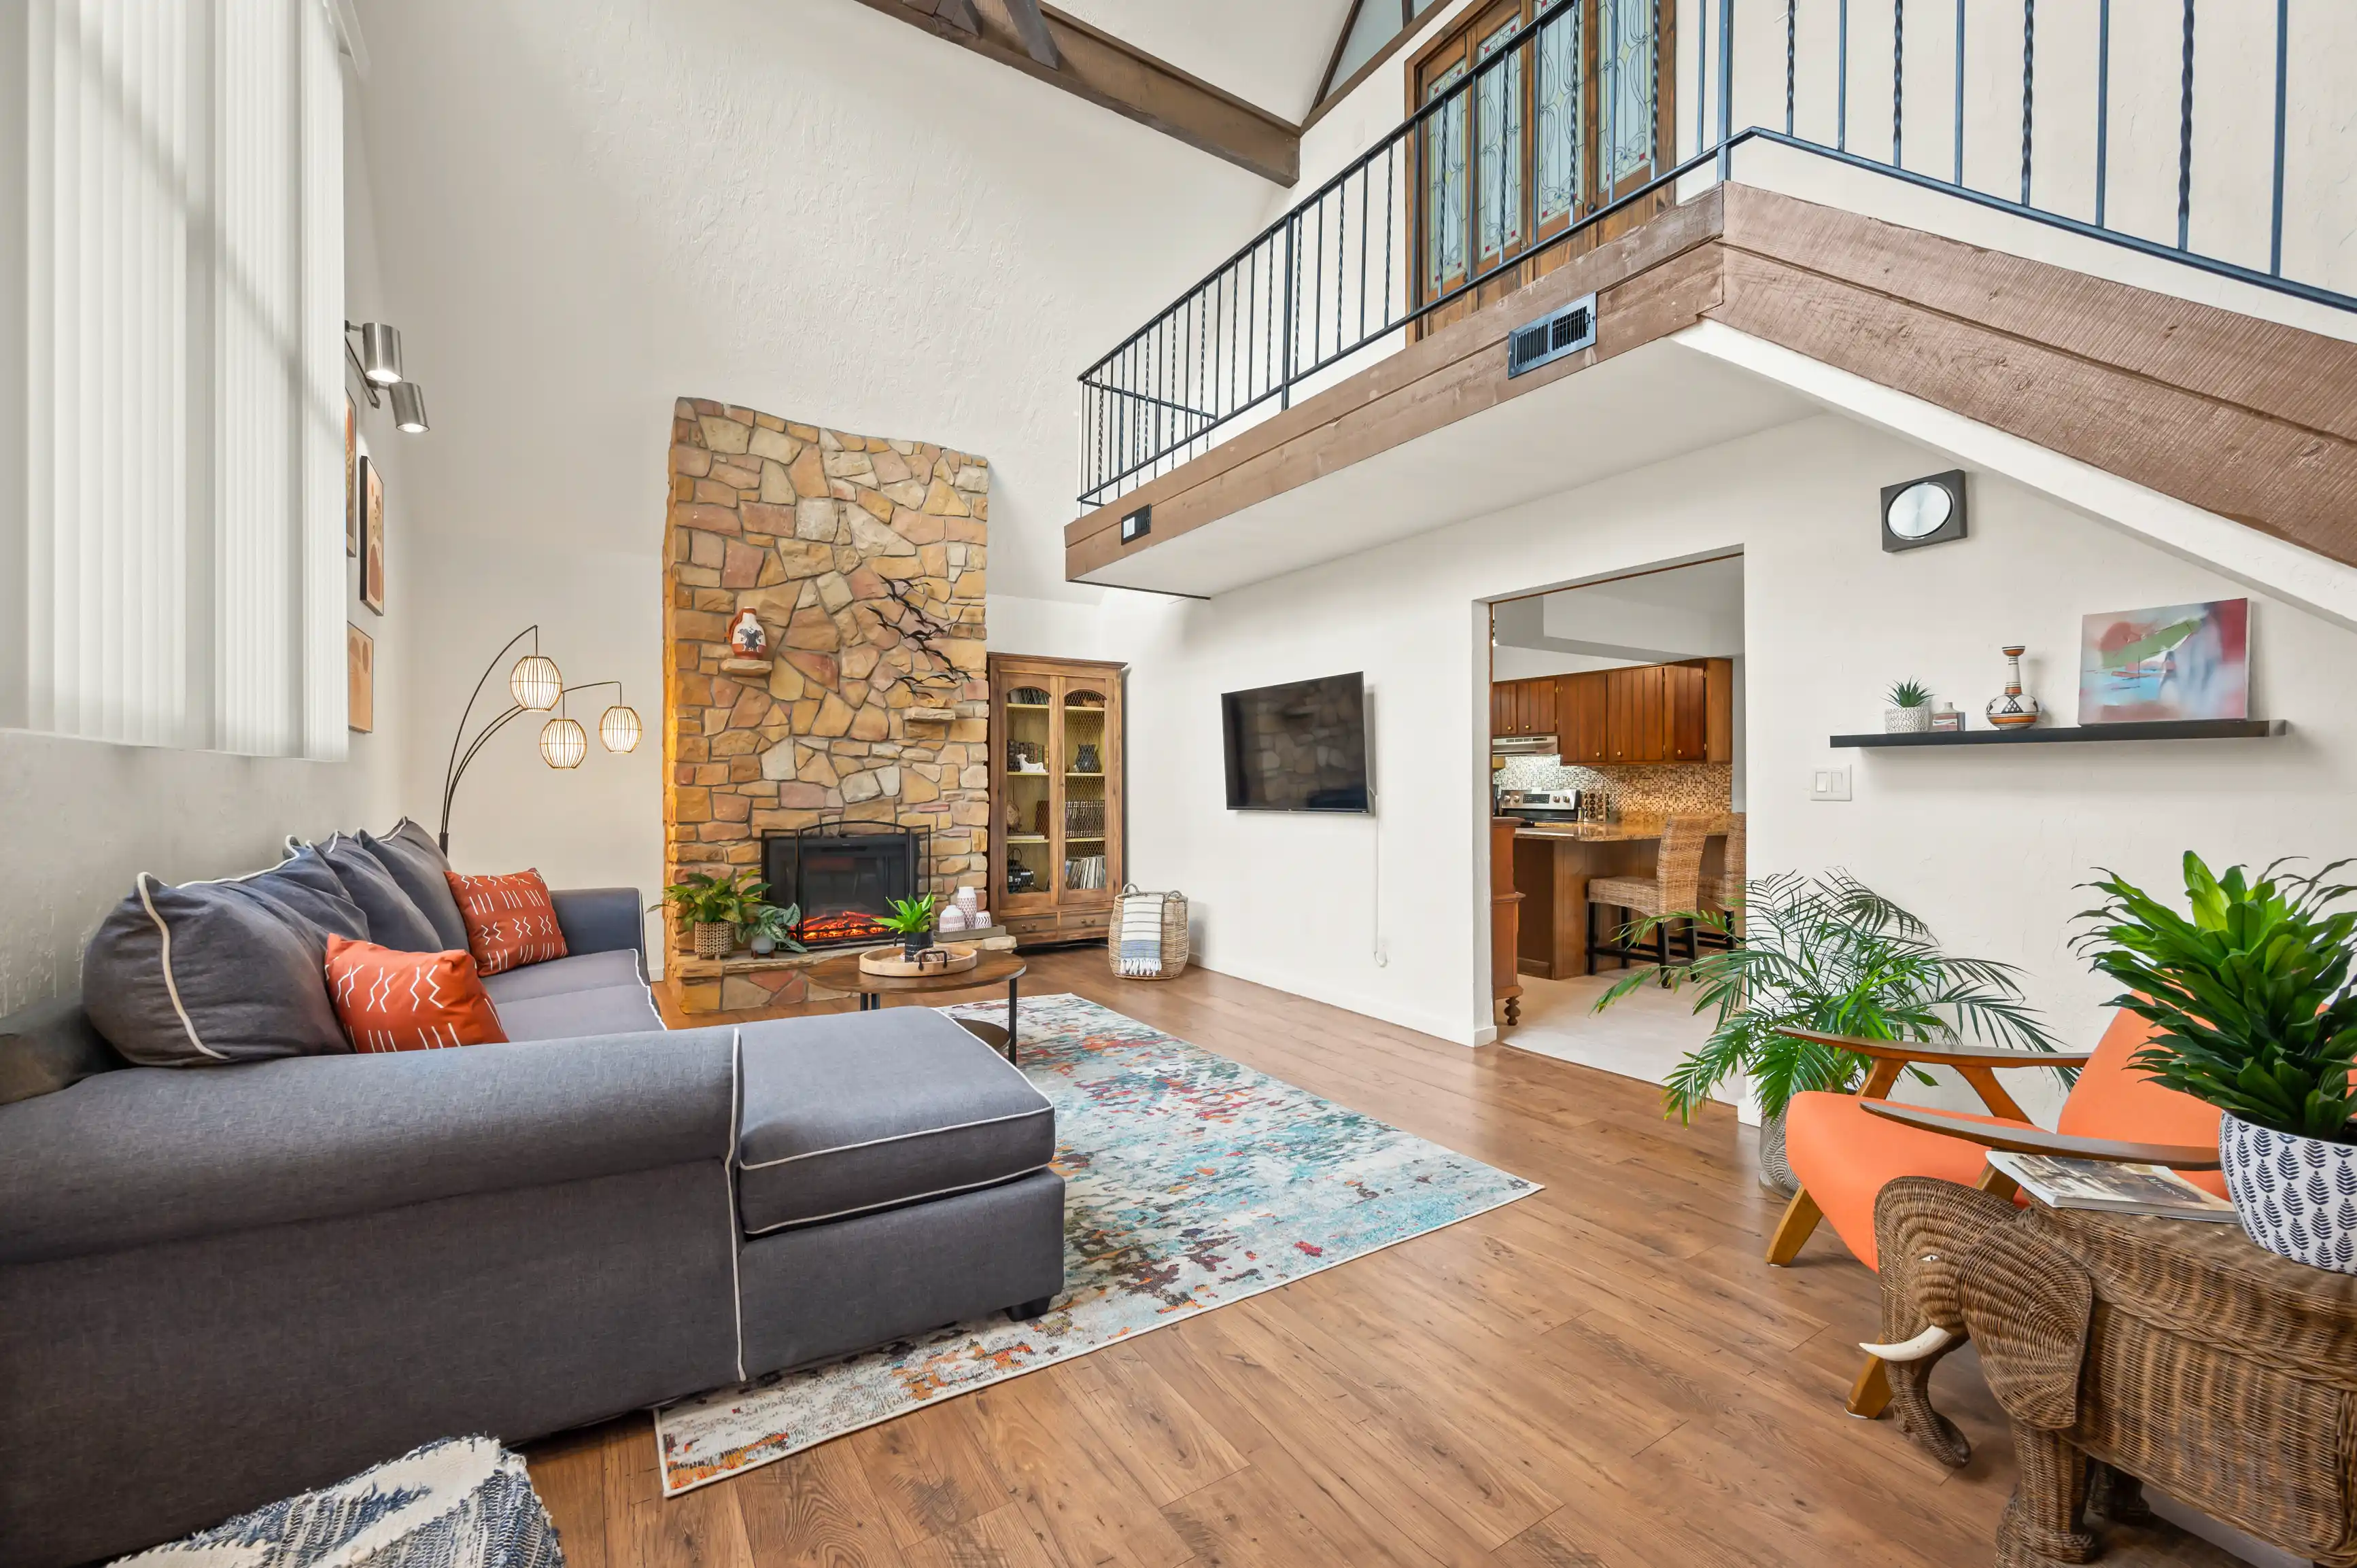 Spacious living room with high ceiling, stone fireplace, L-shaped sofa, colorful rug, wooden flooring, and an upper level balcony with railing.